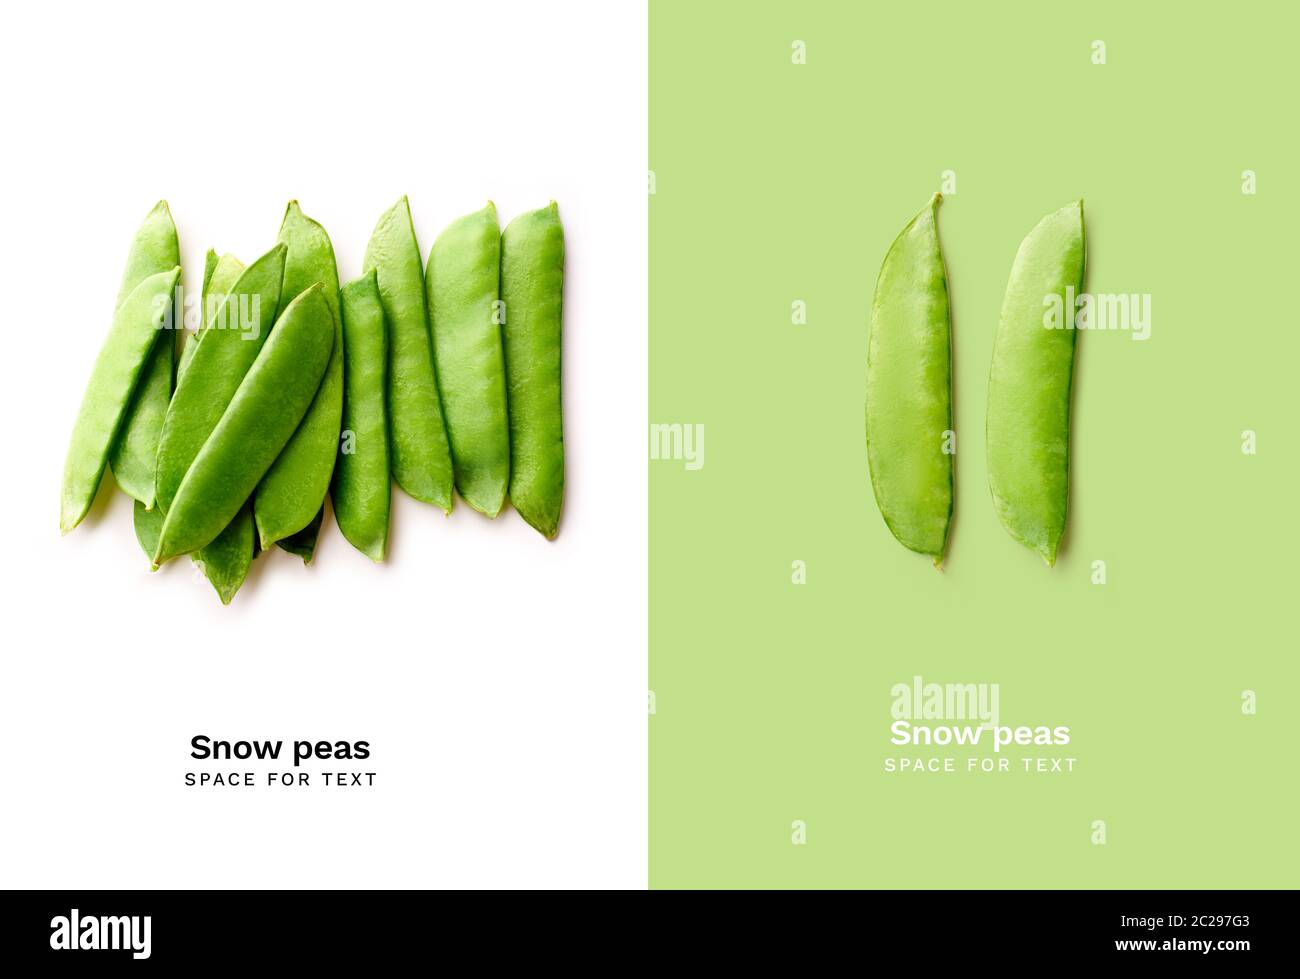 Top view image of fresh thin snow peas isolated on white background. View from above with copy space. Healthy vegetarian meal ingredient Stock Photo